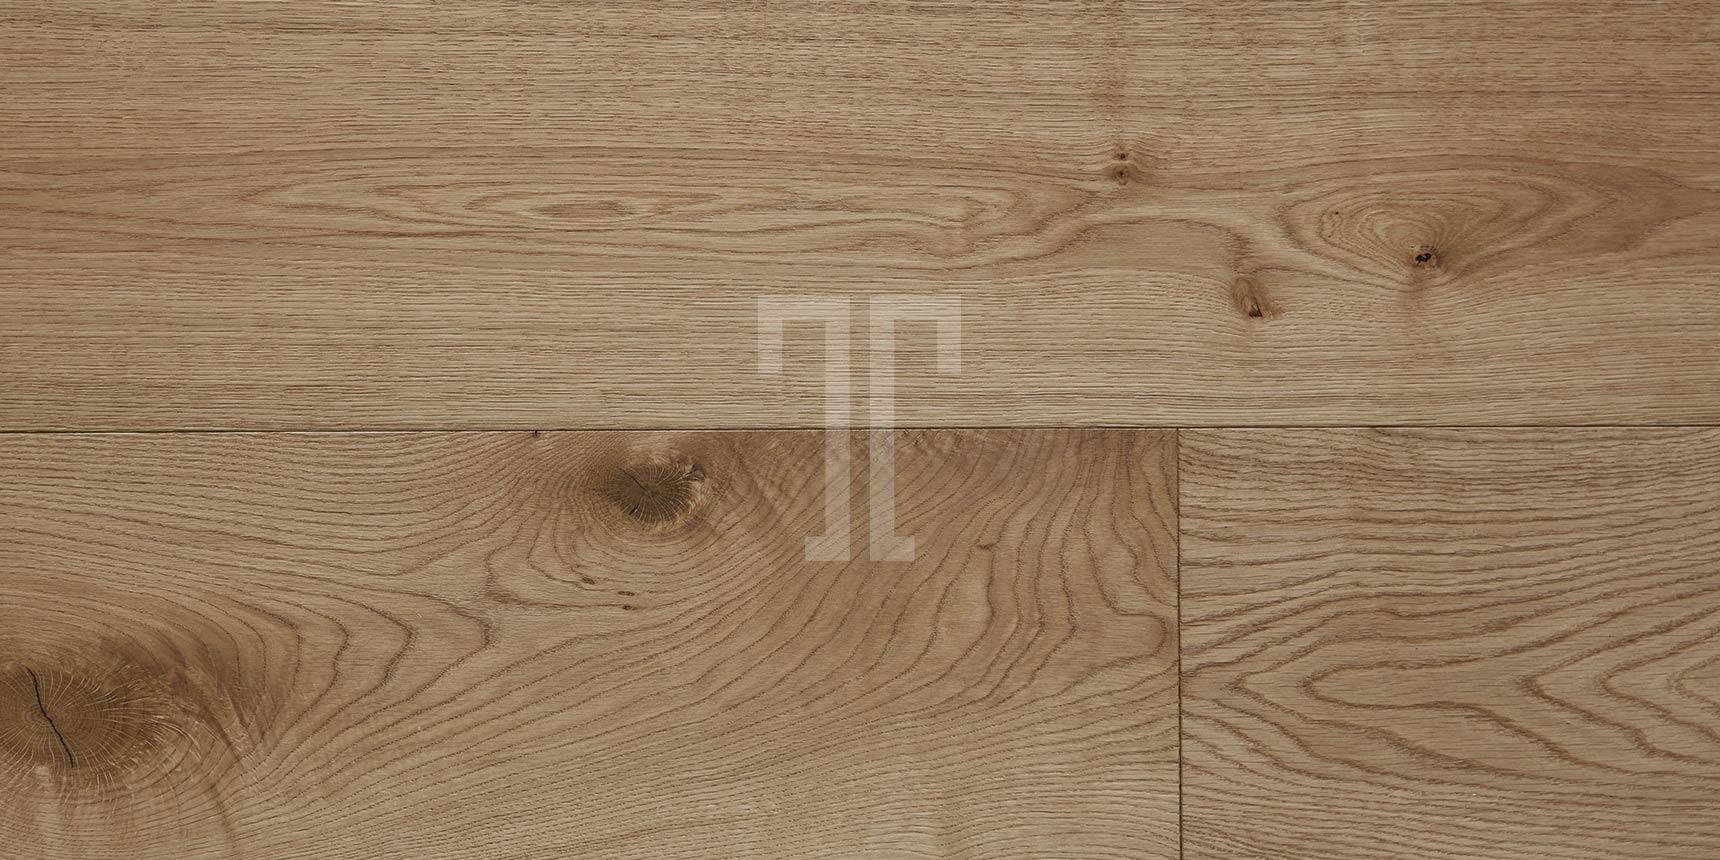 Ted Todd Project Extra Wide 14mm Plank Engineered Flooring £99.95m2